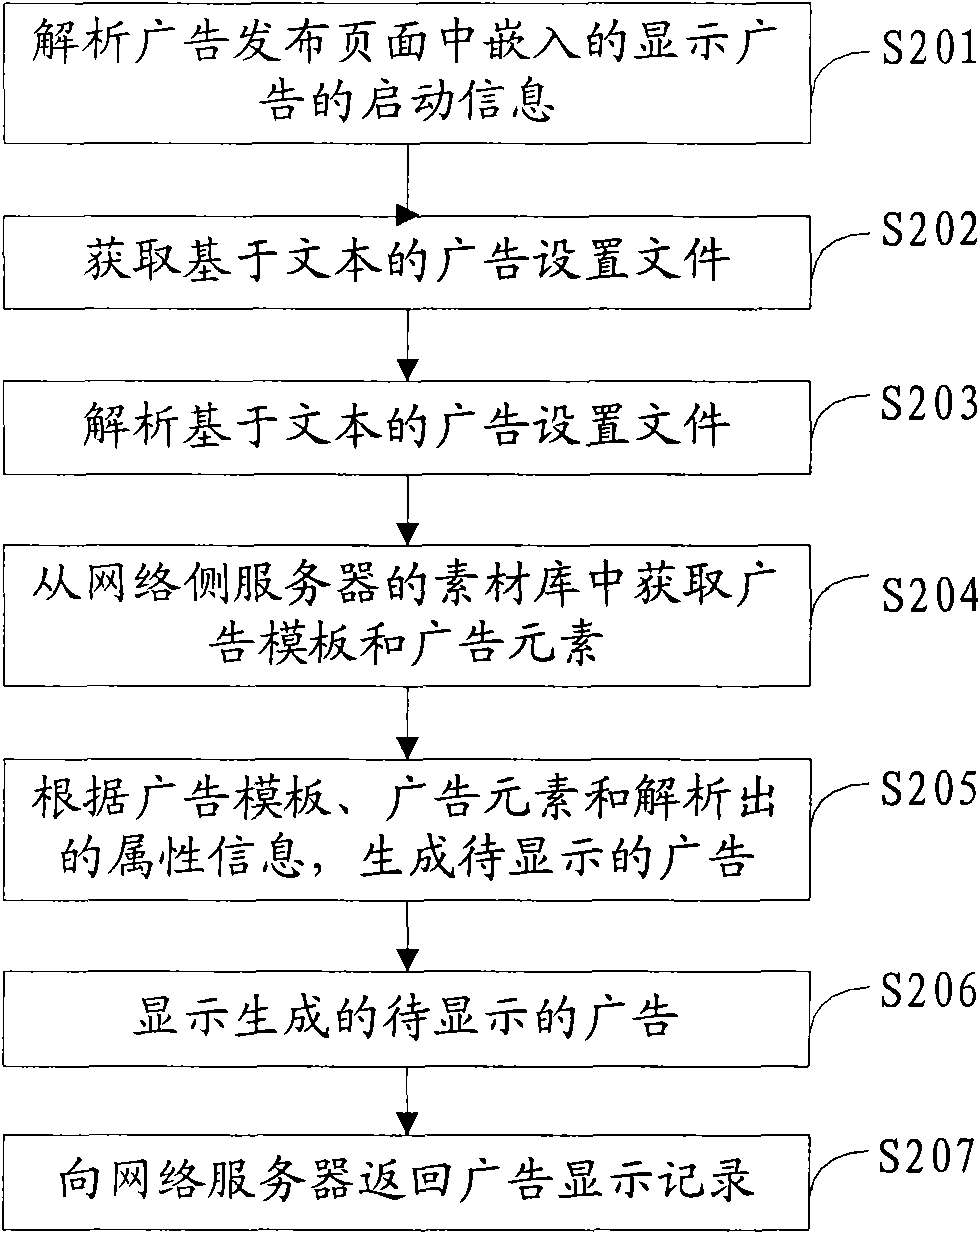 Method and system for advertisement generation and display and advertisement production and display client